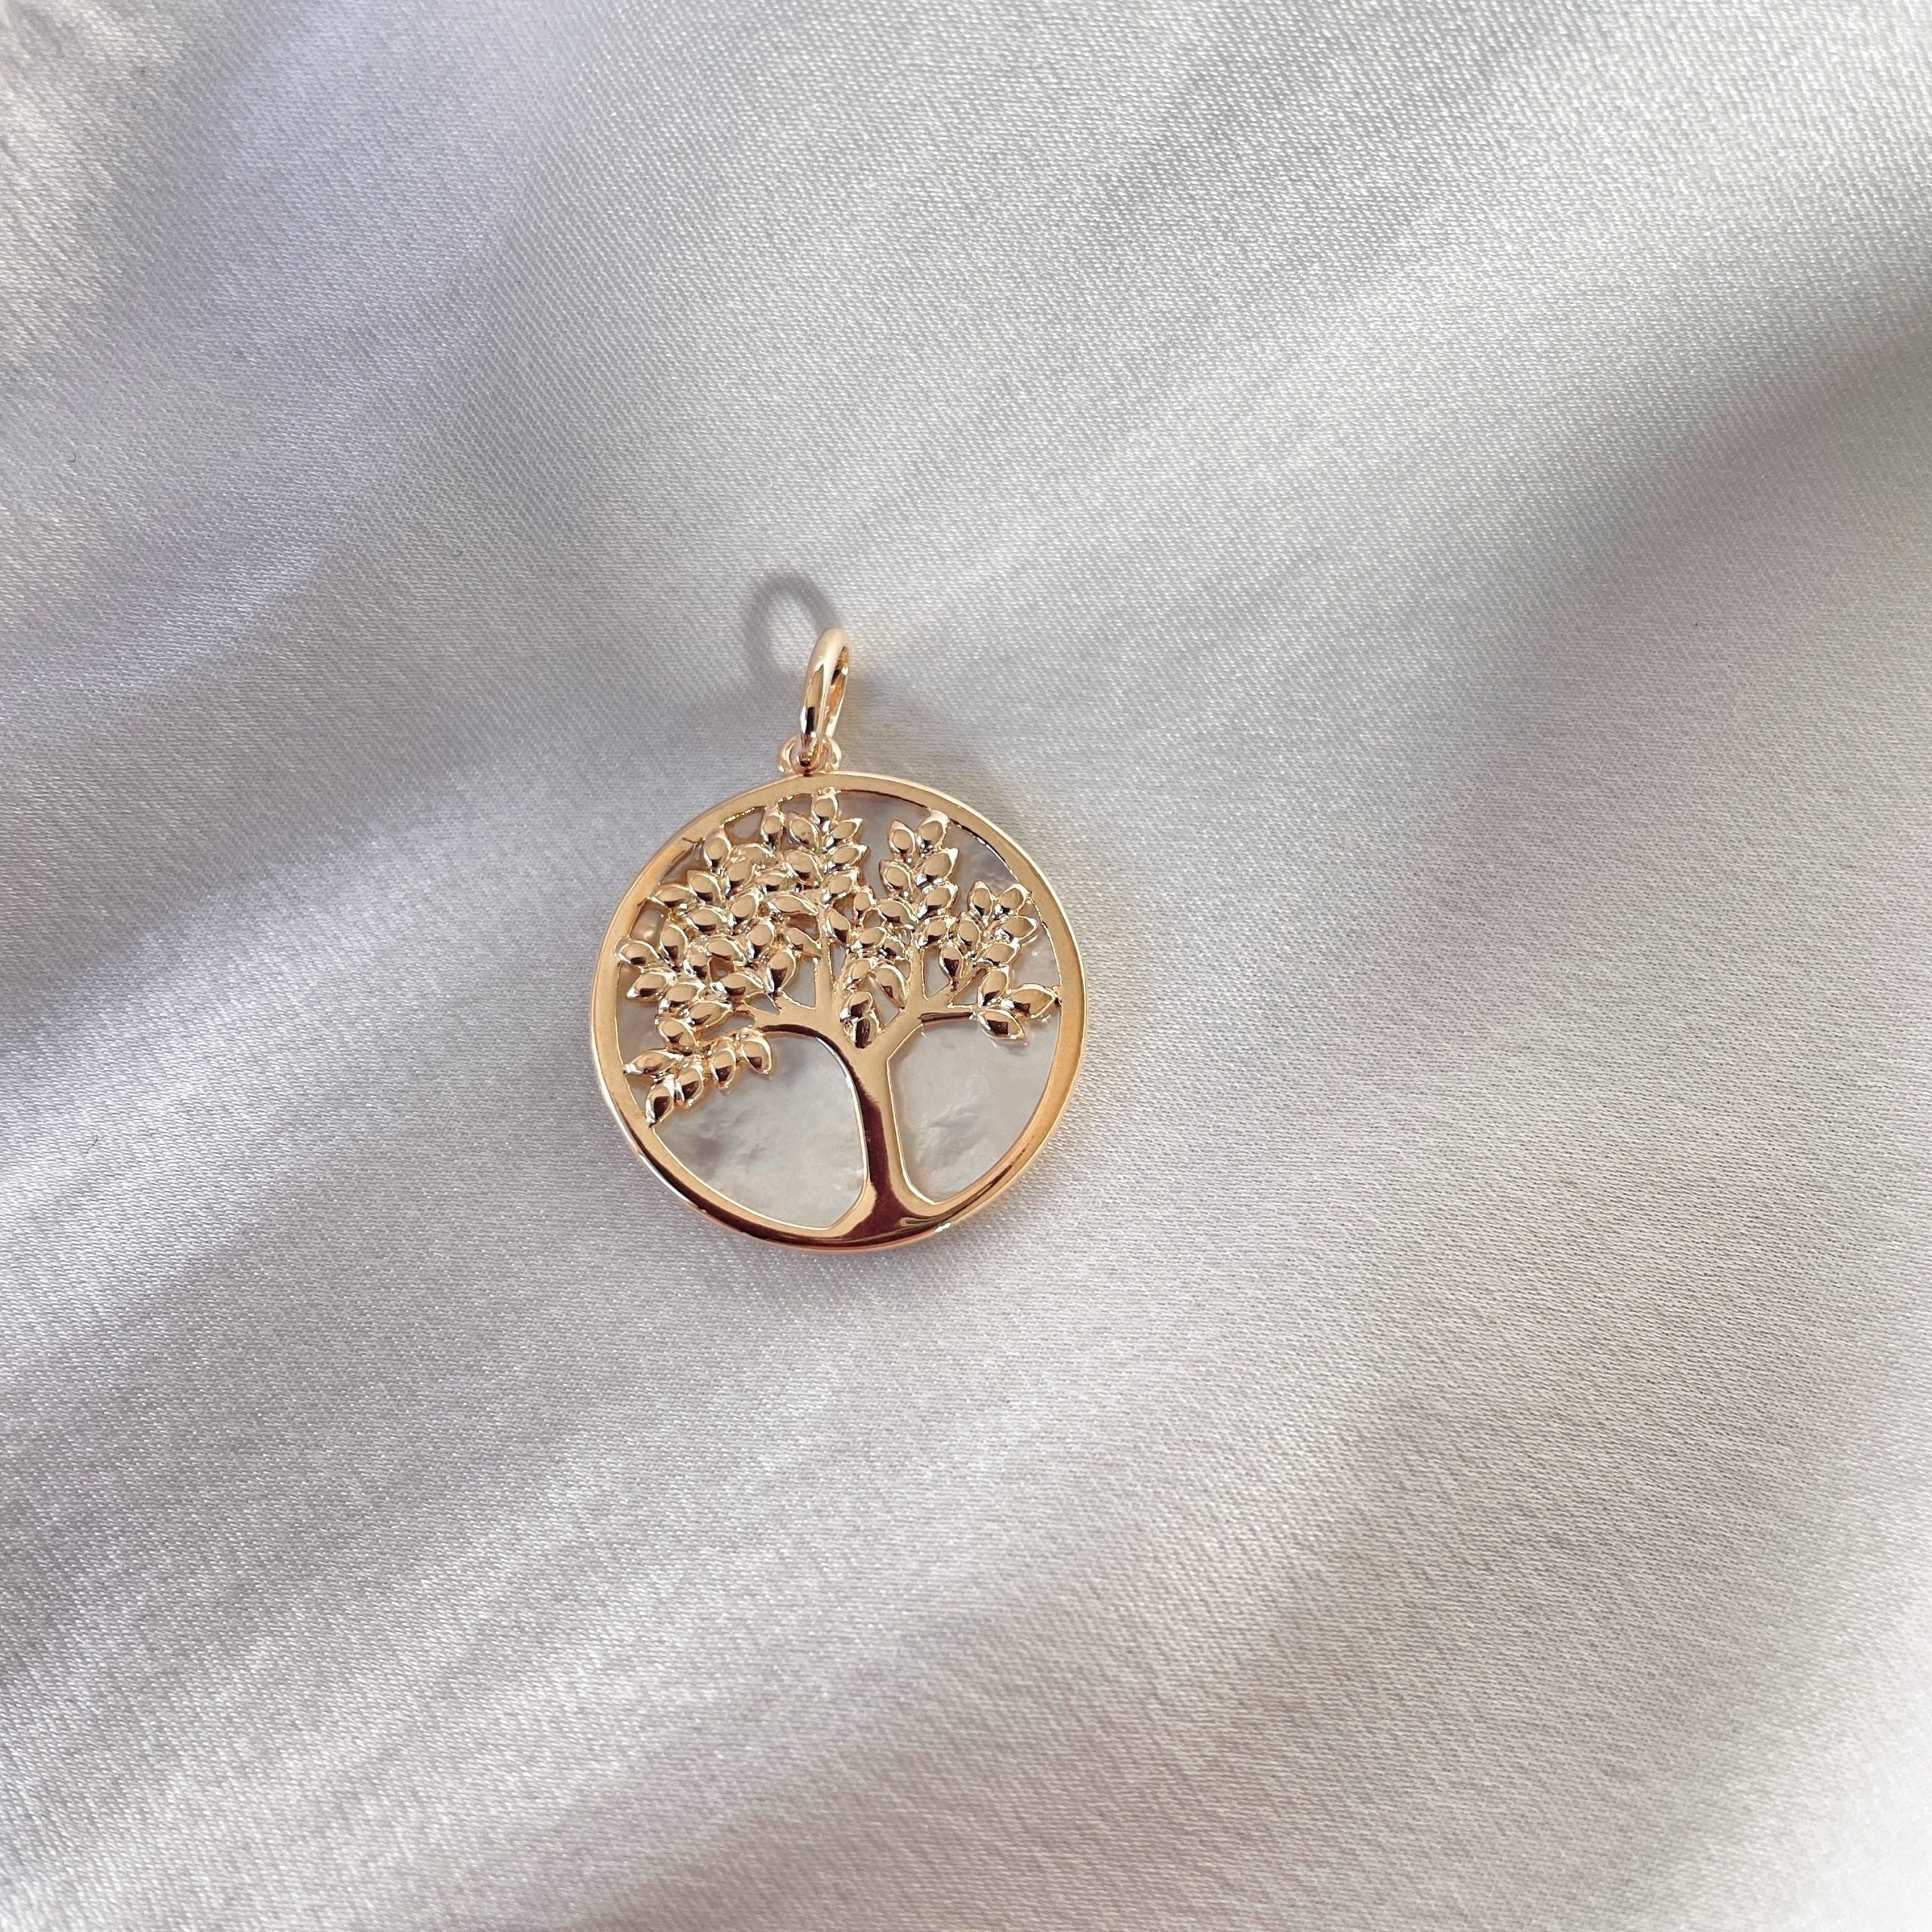 Gold-plated “Tree of Life” pendant